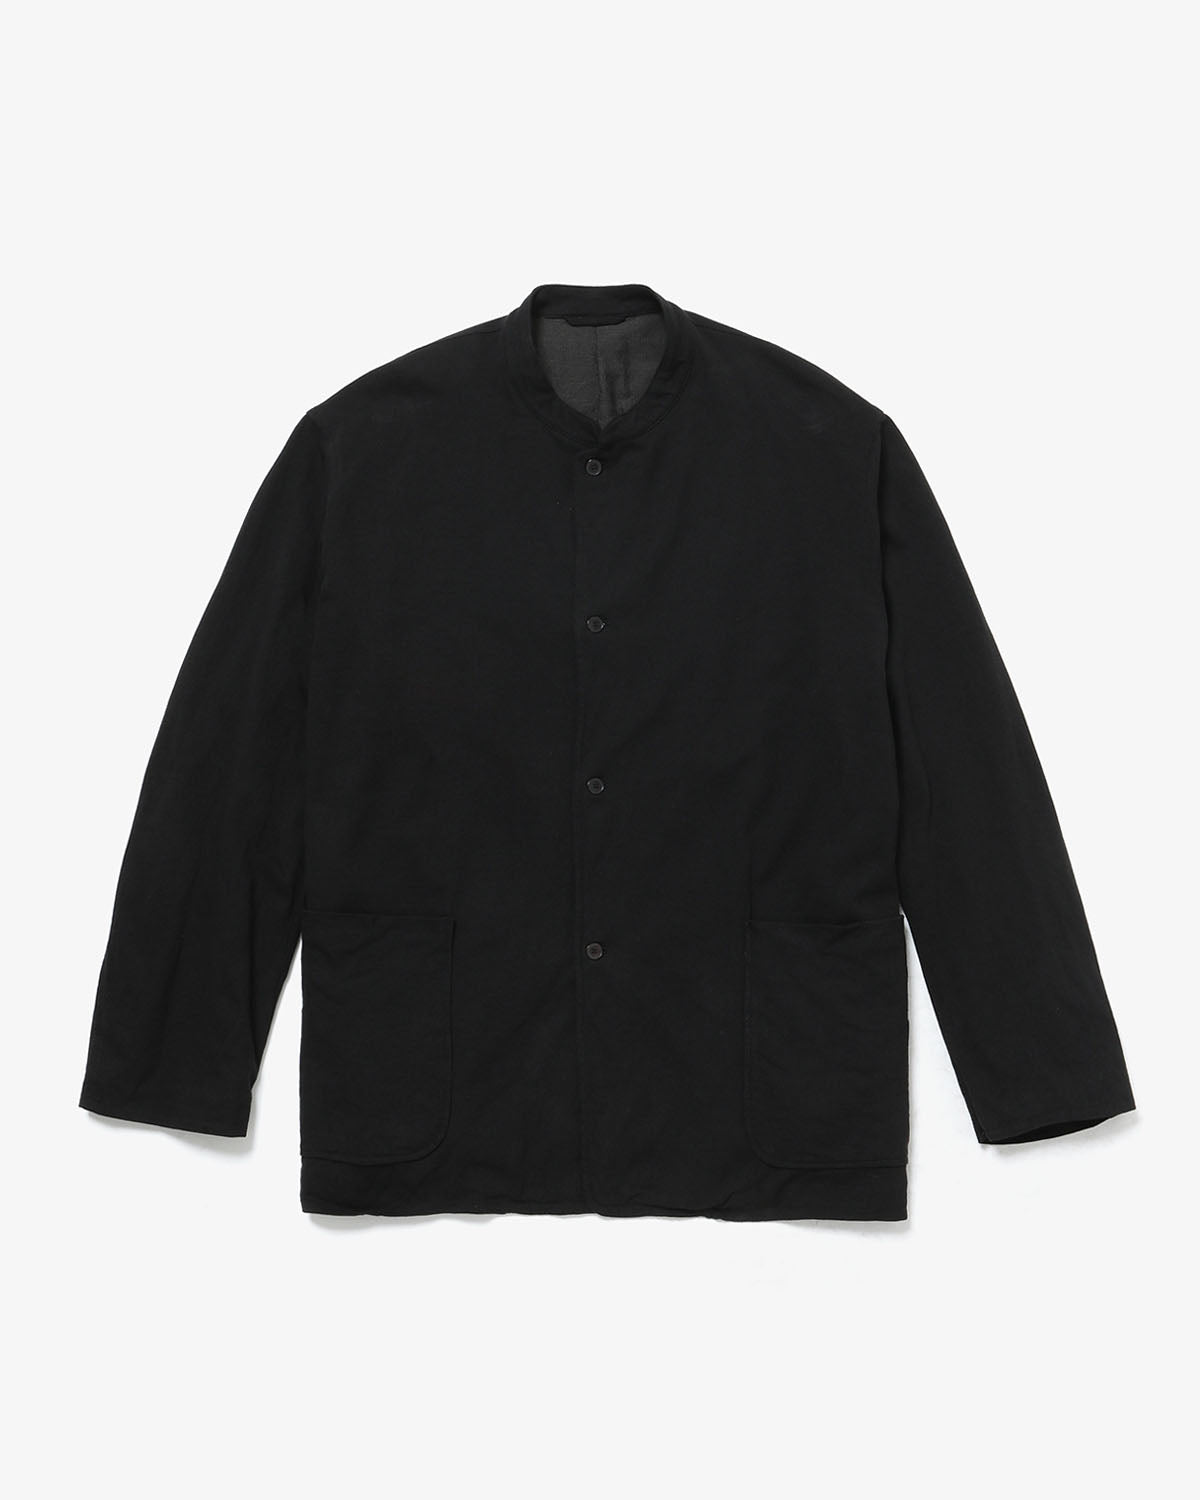 COTTON JERSEY STAND COLLAR JACKET